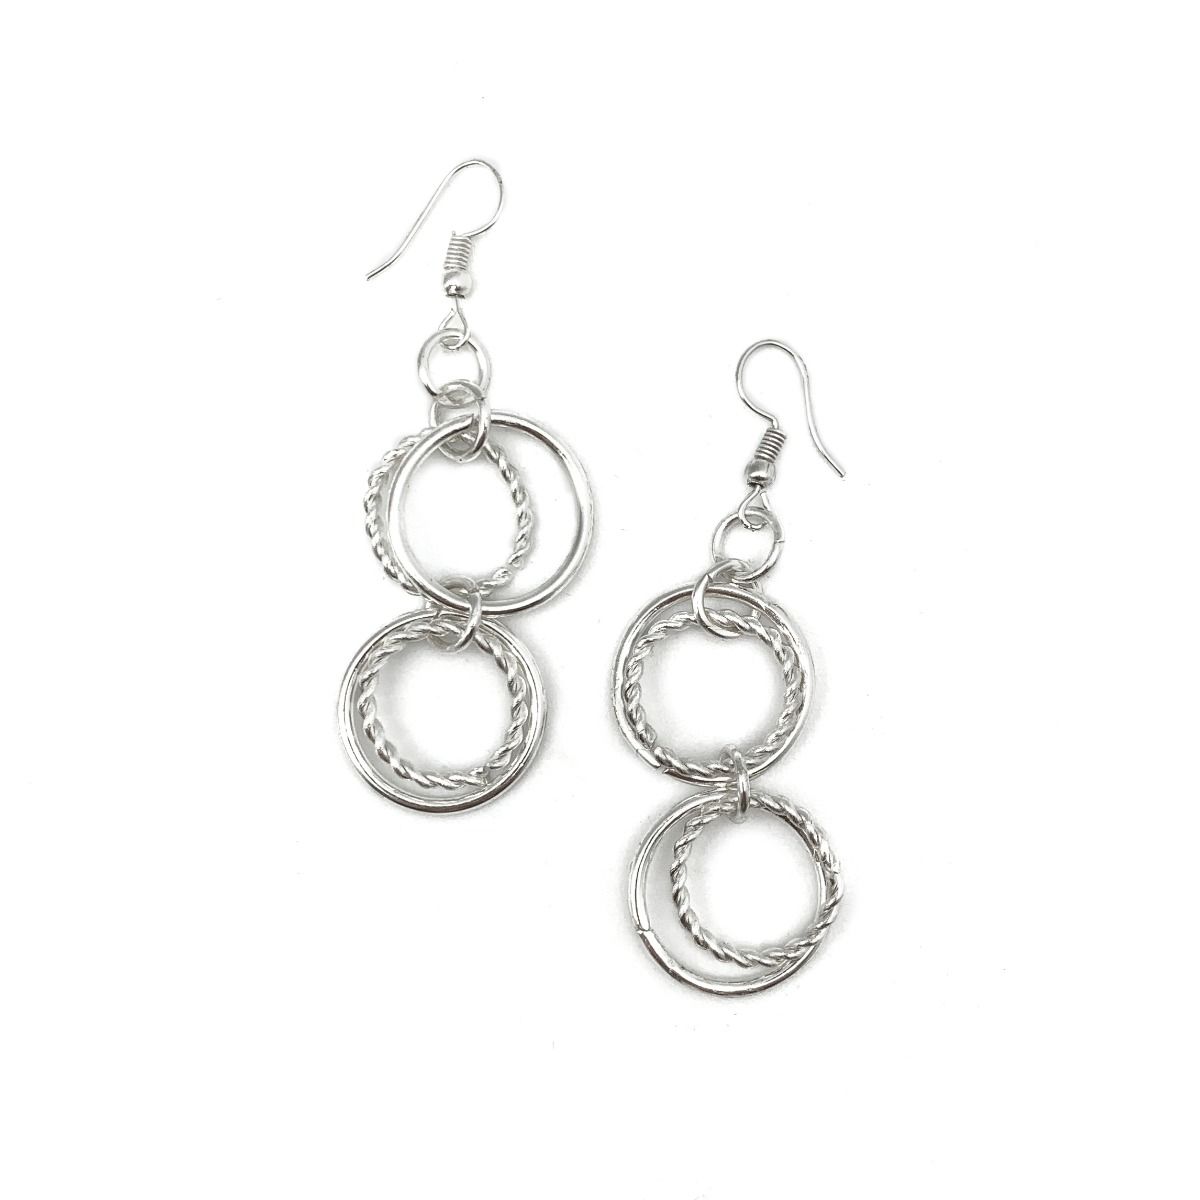 Anju Silver Plated Double Ring Earrings